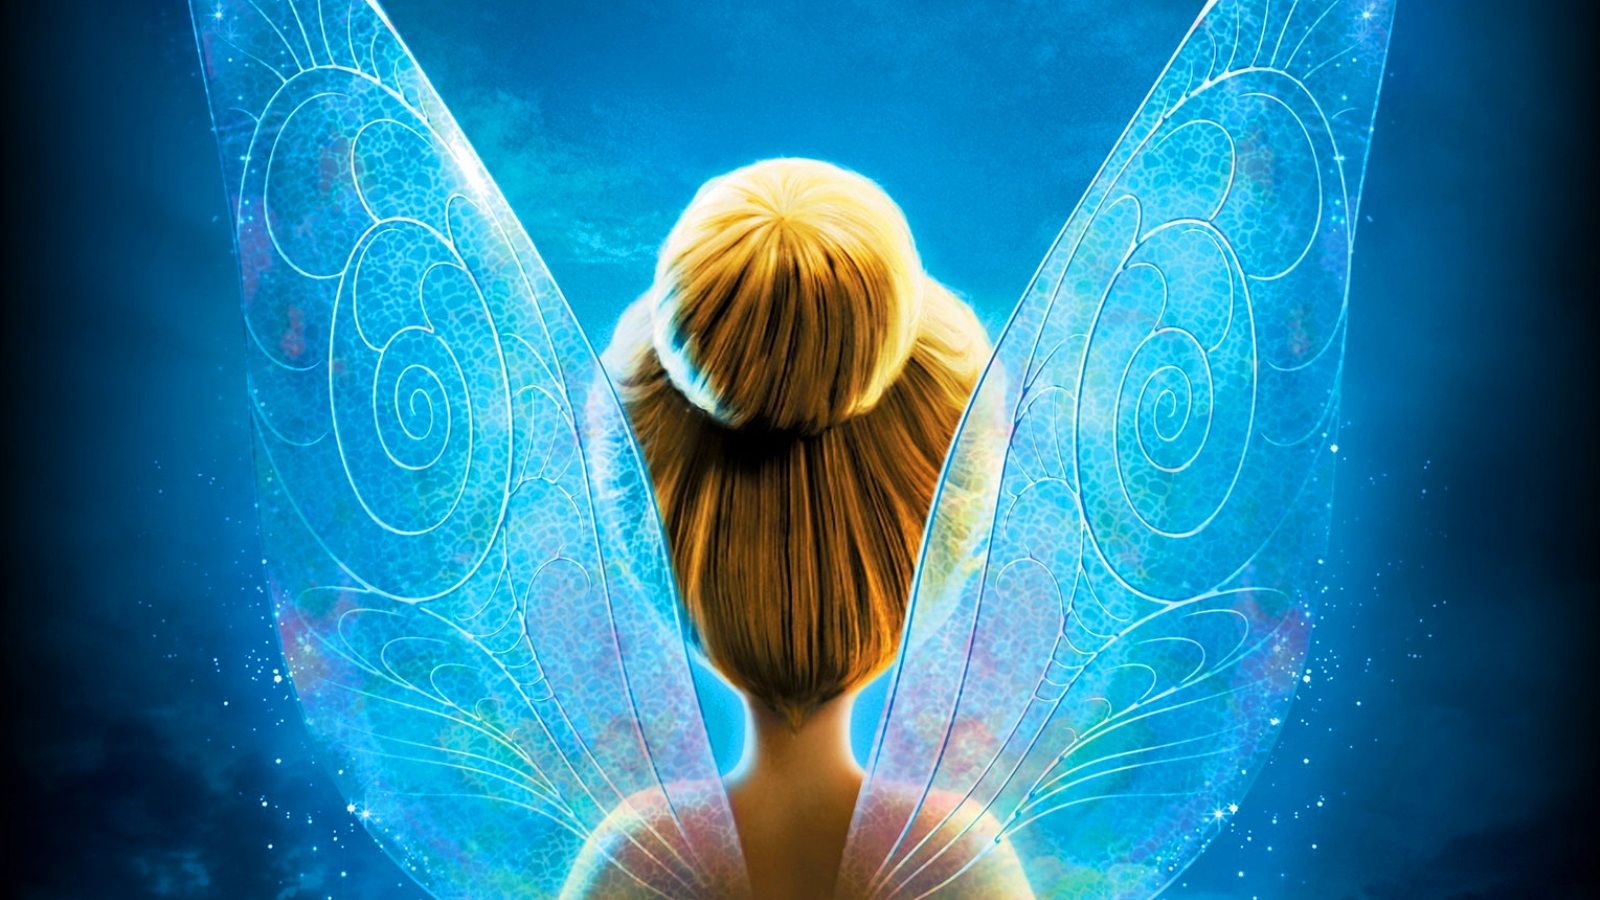 Tinkerbell Wallpaper Quotes. QuotesGram